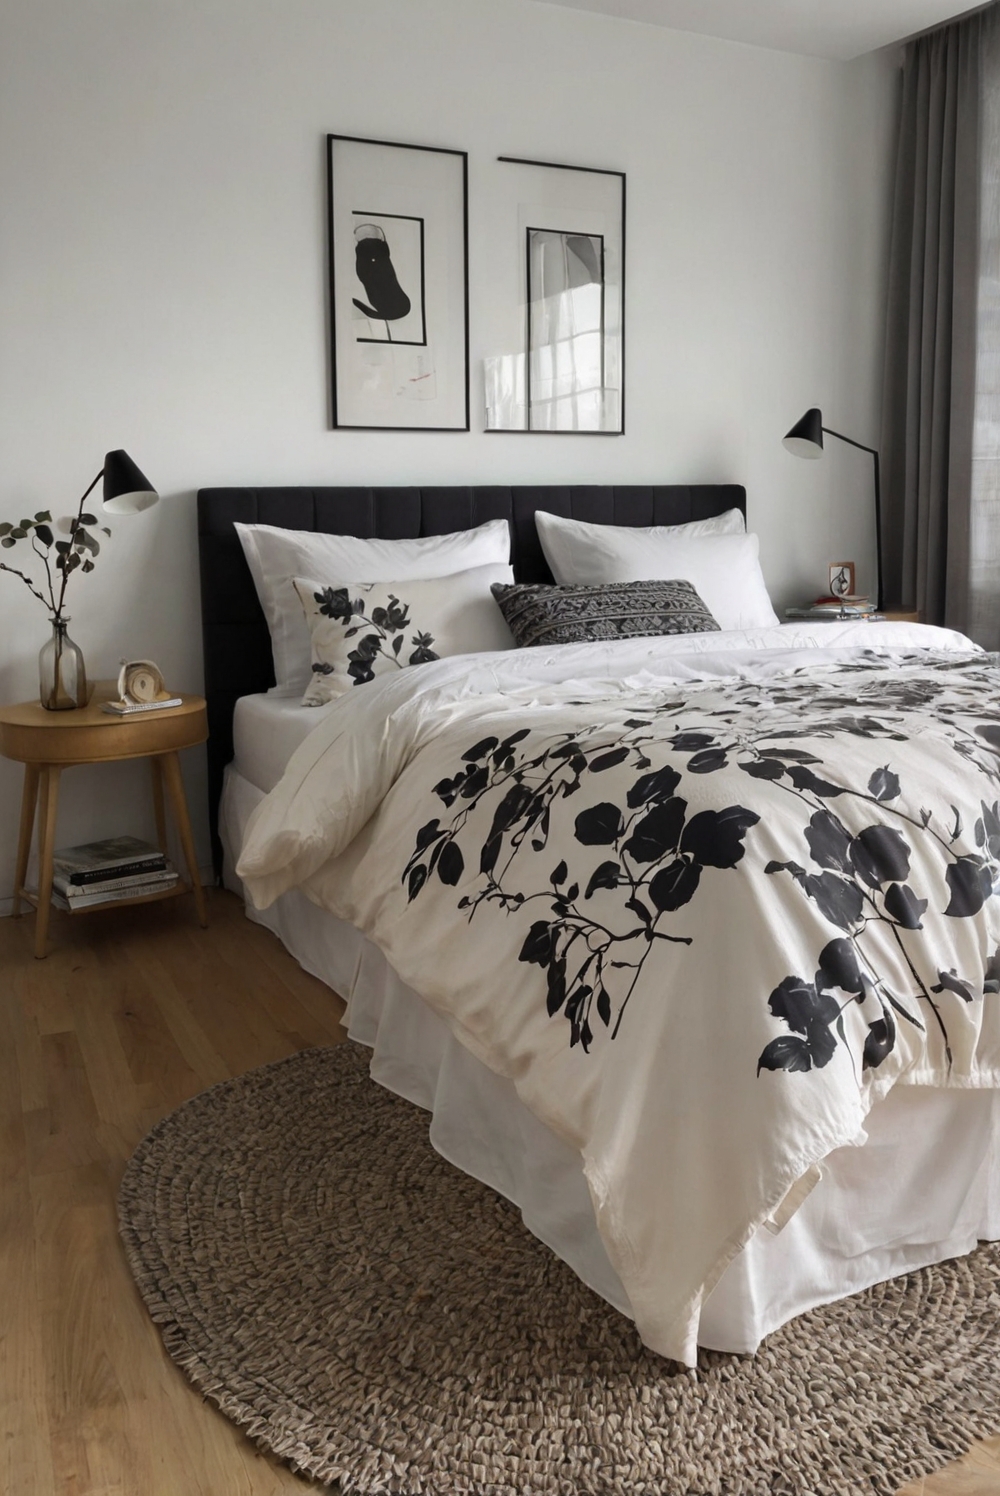 Why should you consider using a bed skirt for a polished look?